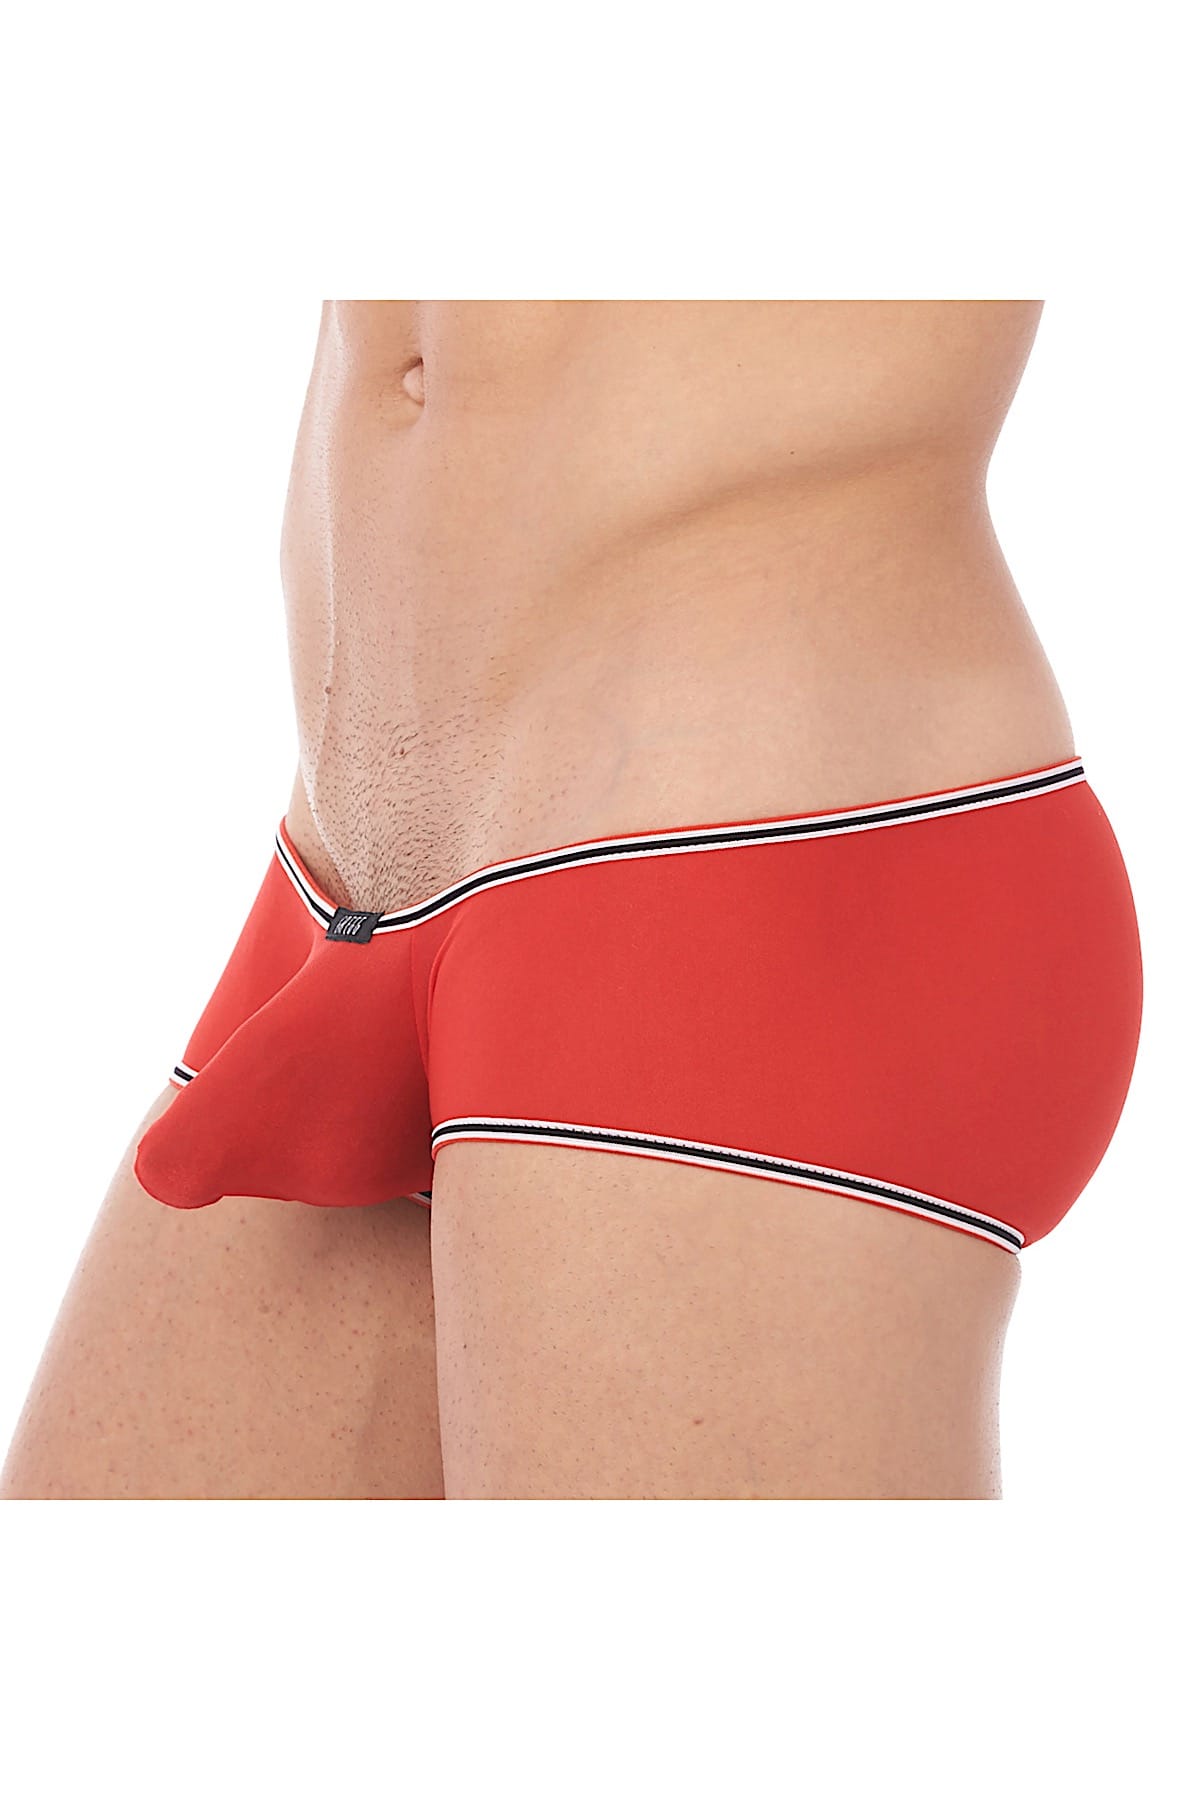 Gregg Homme Red Touch Sheer Hyperstretch Boxer Brief